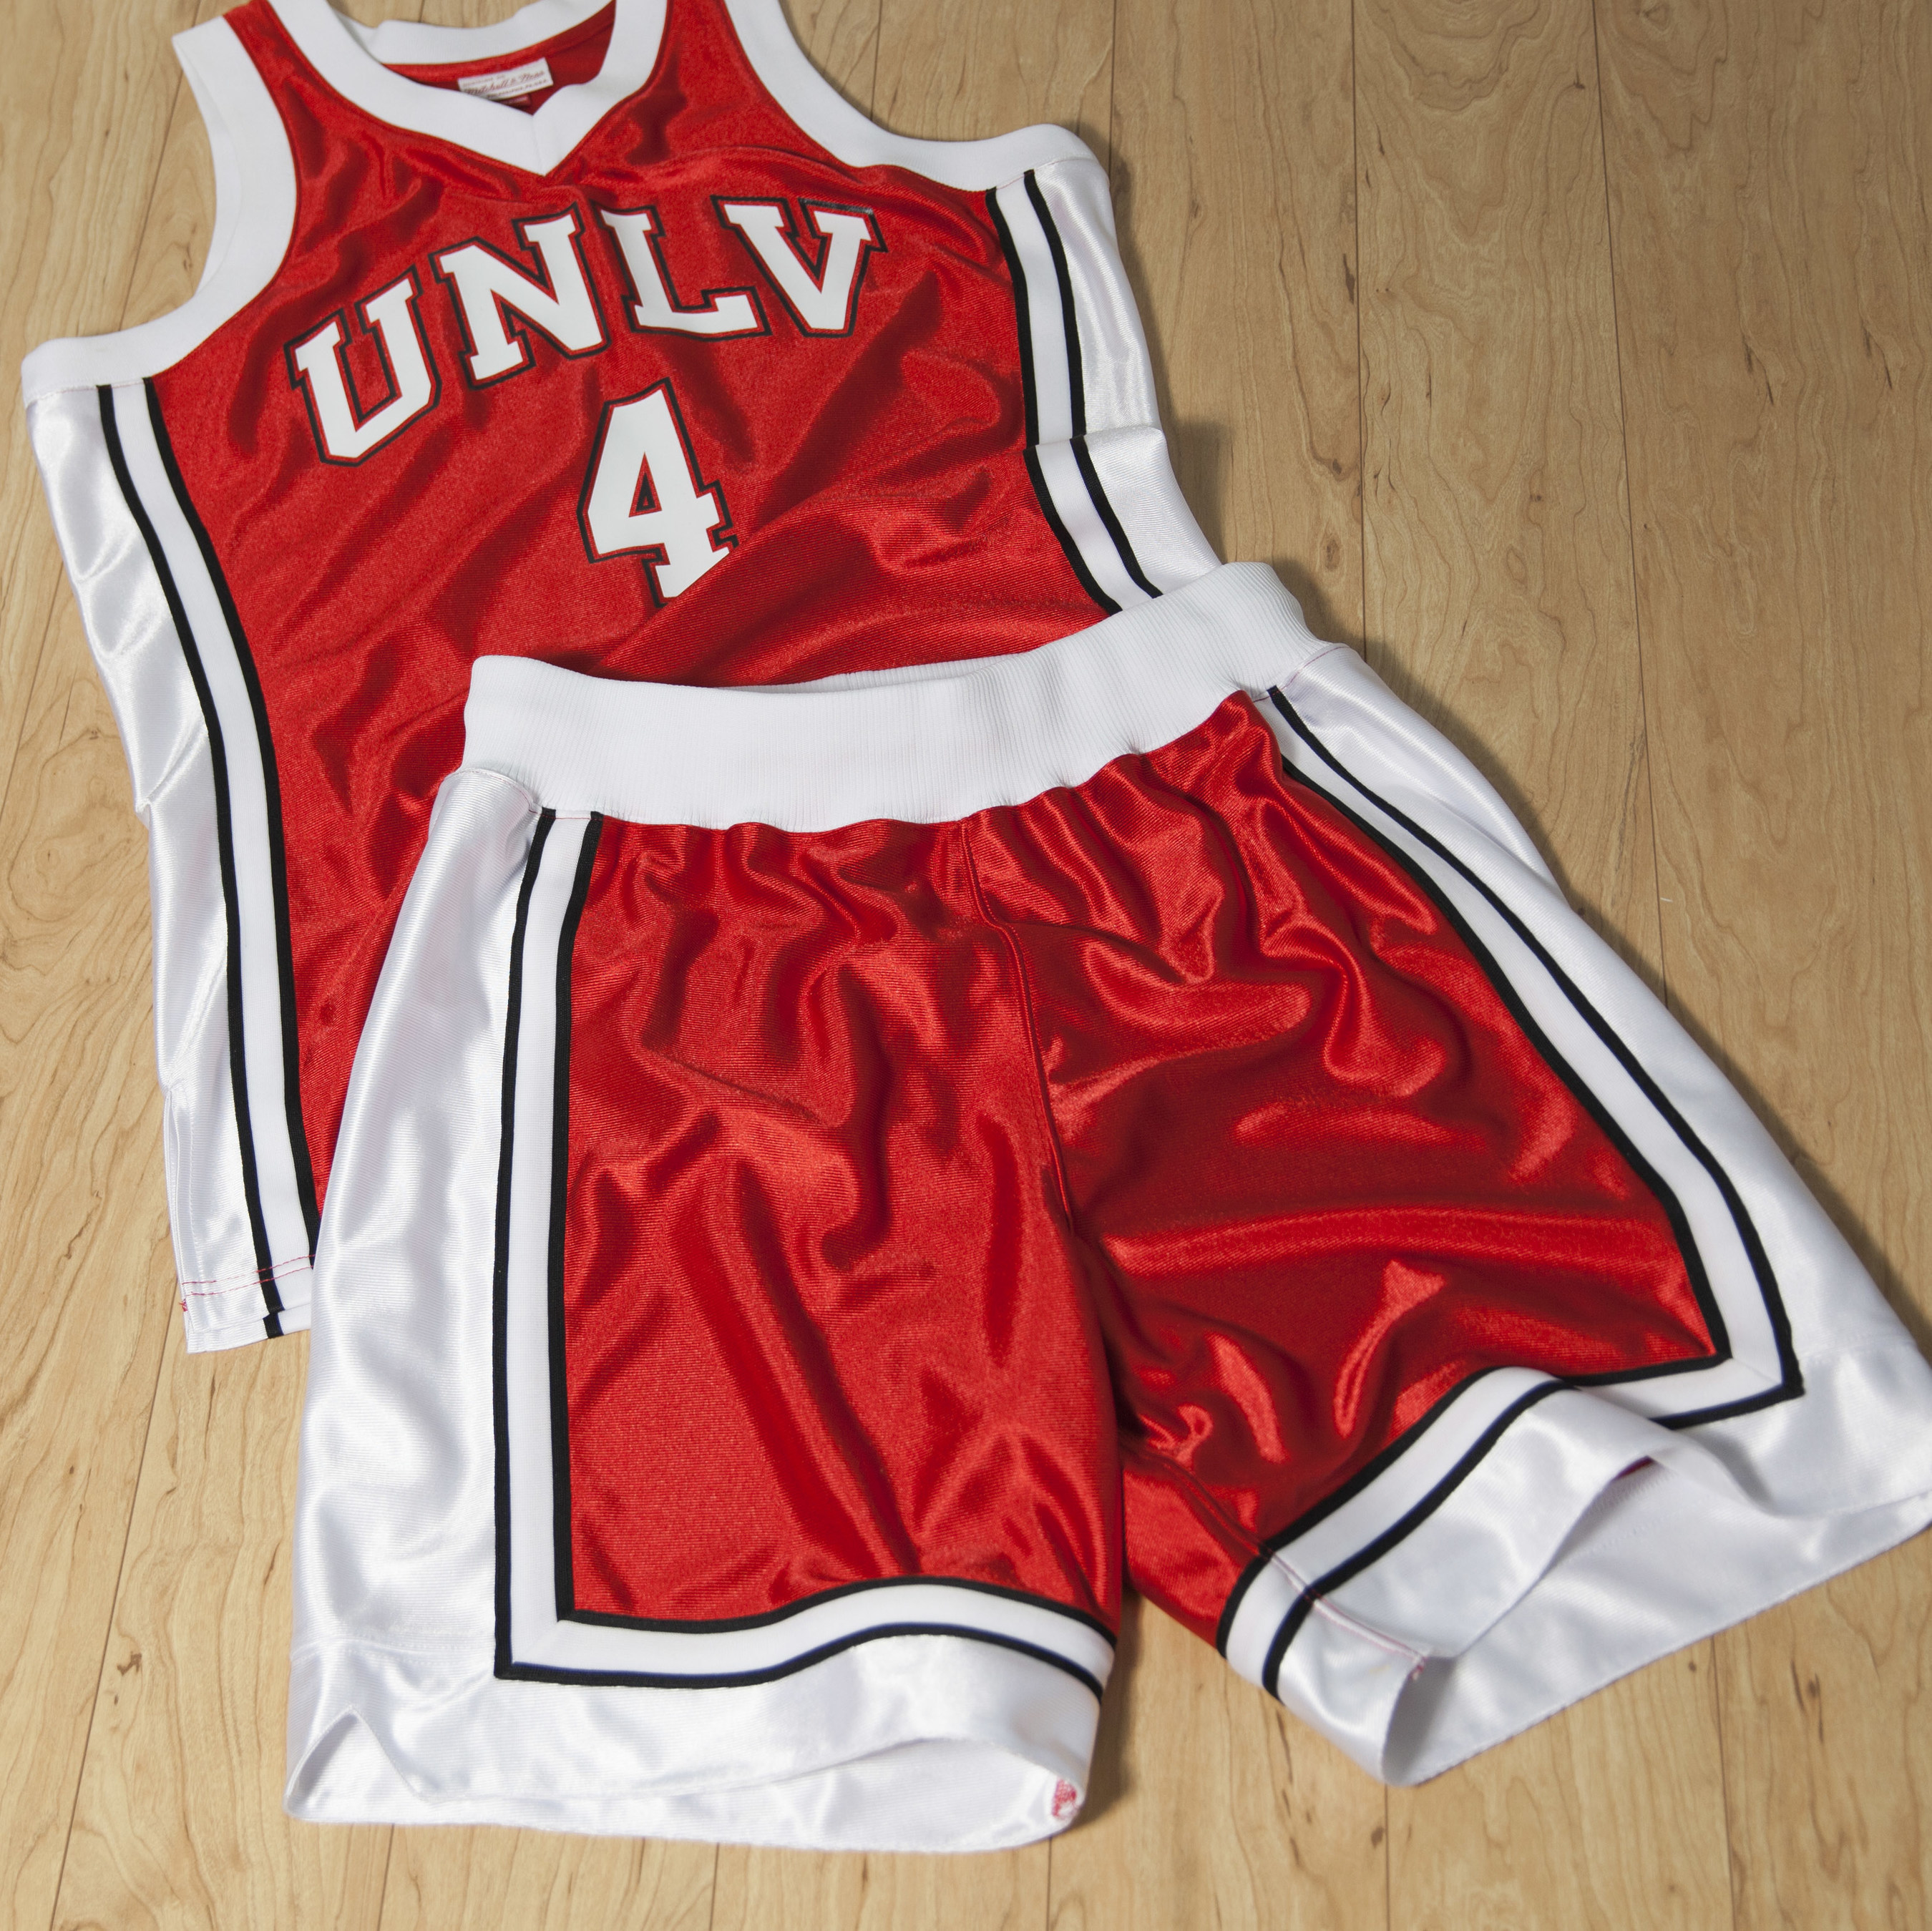 UNLV NCAA Authentic Jersey and Shorts